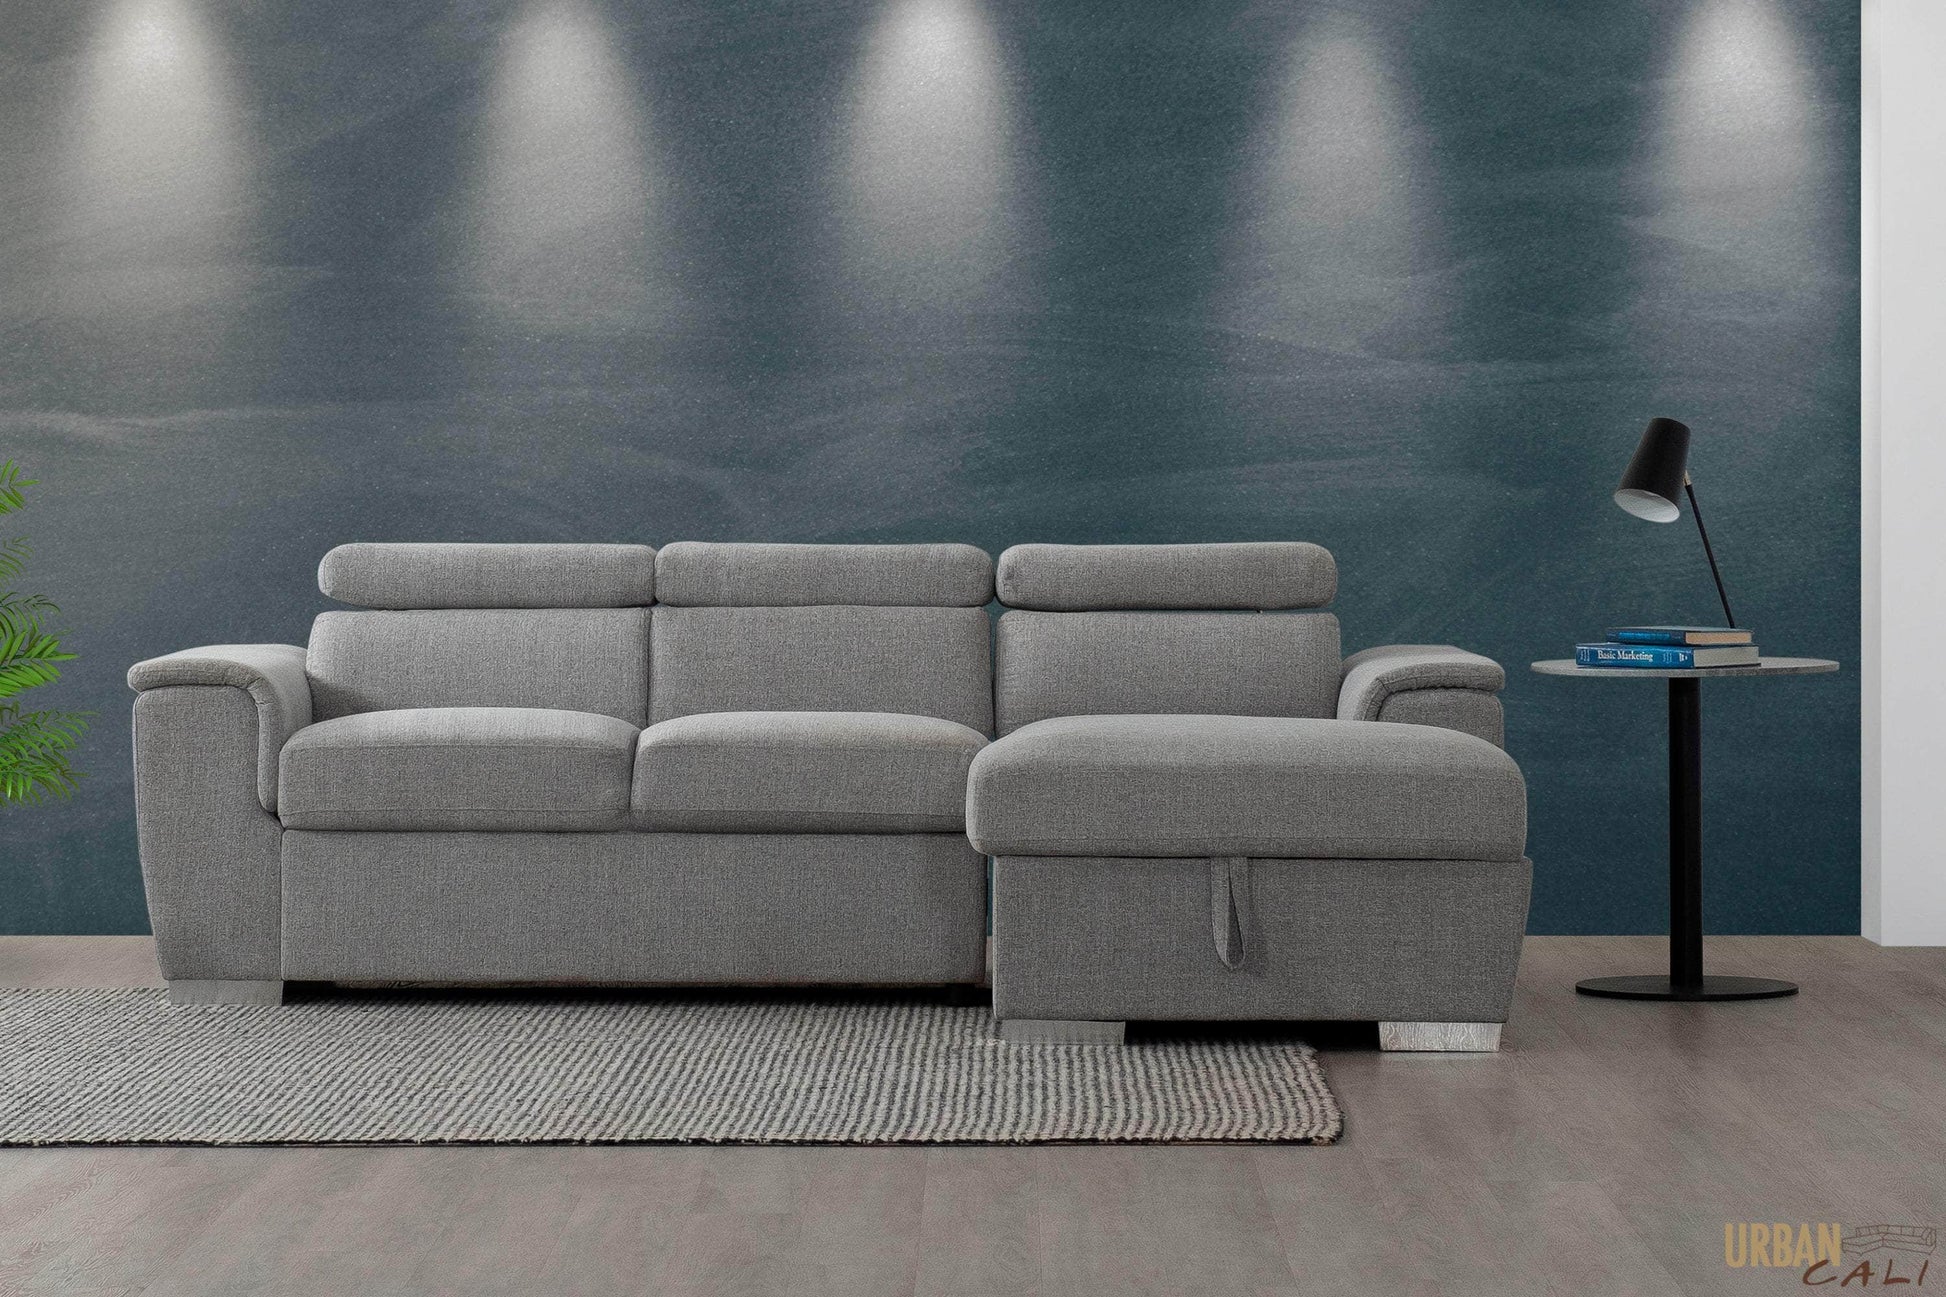 Urban Cali Sectional Right Facing Chaise Bel Air Modular Sectional Sofa with Storage Chaise in Thora Stone